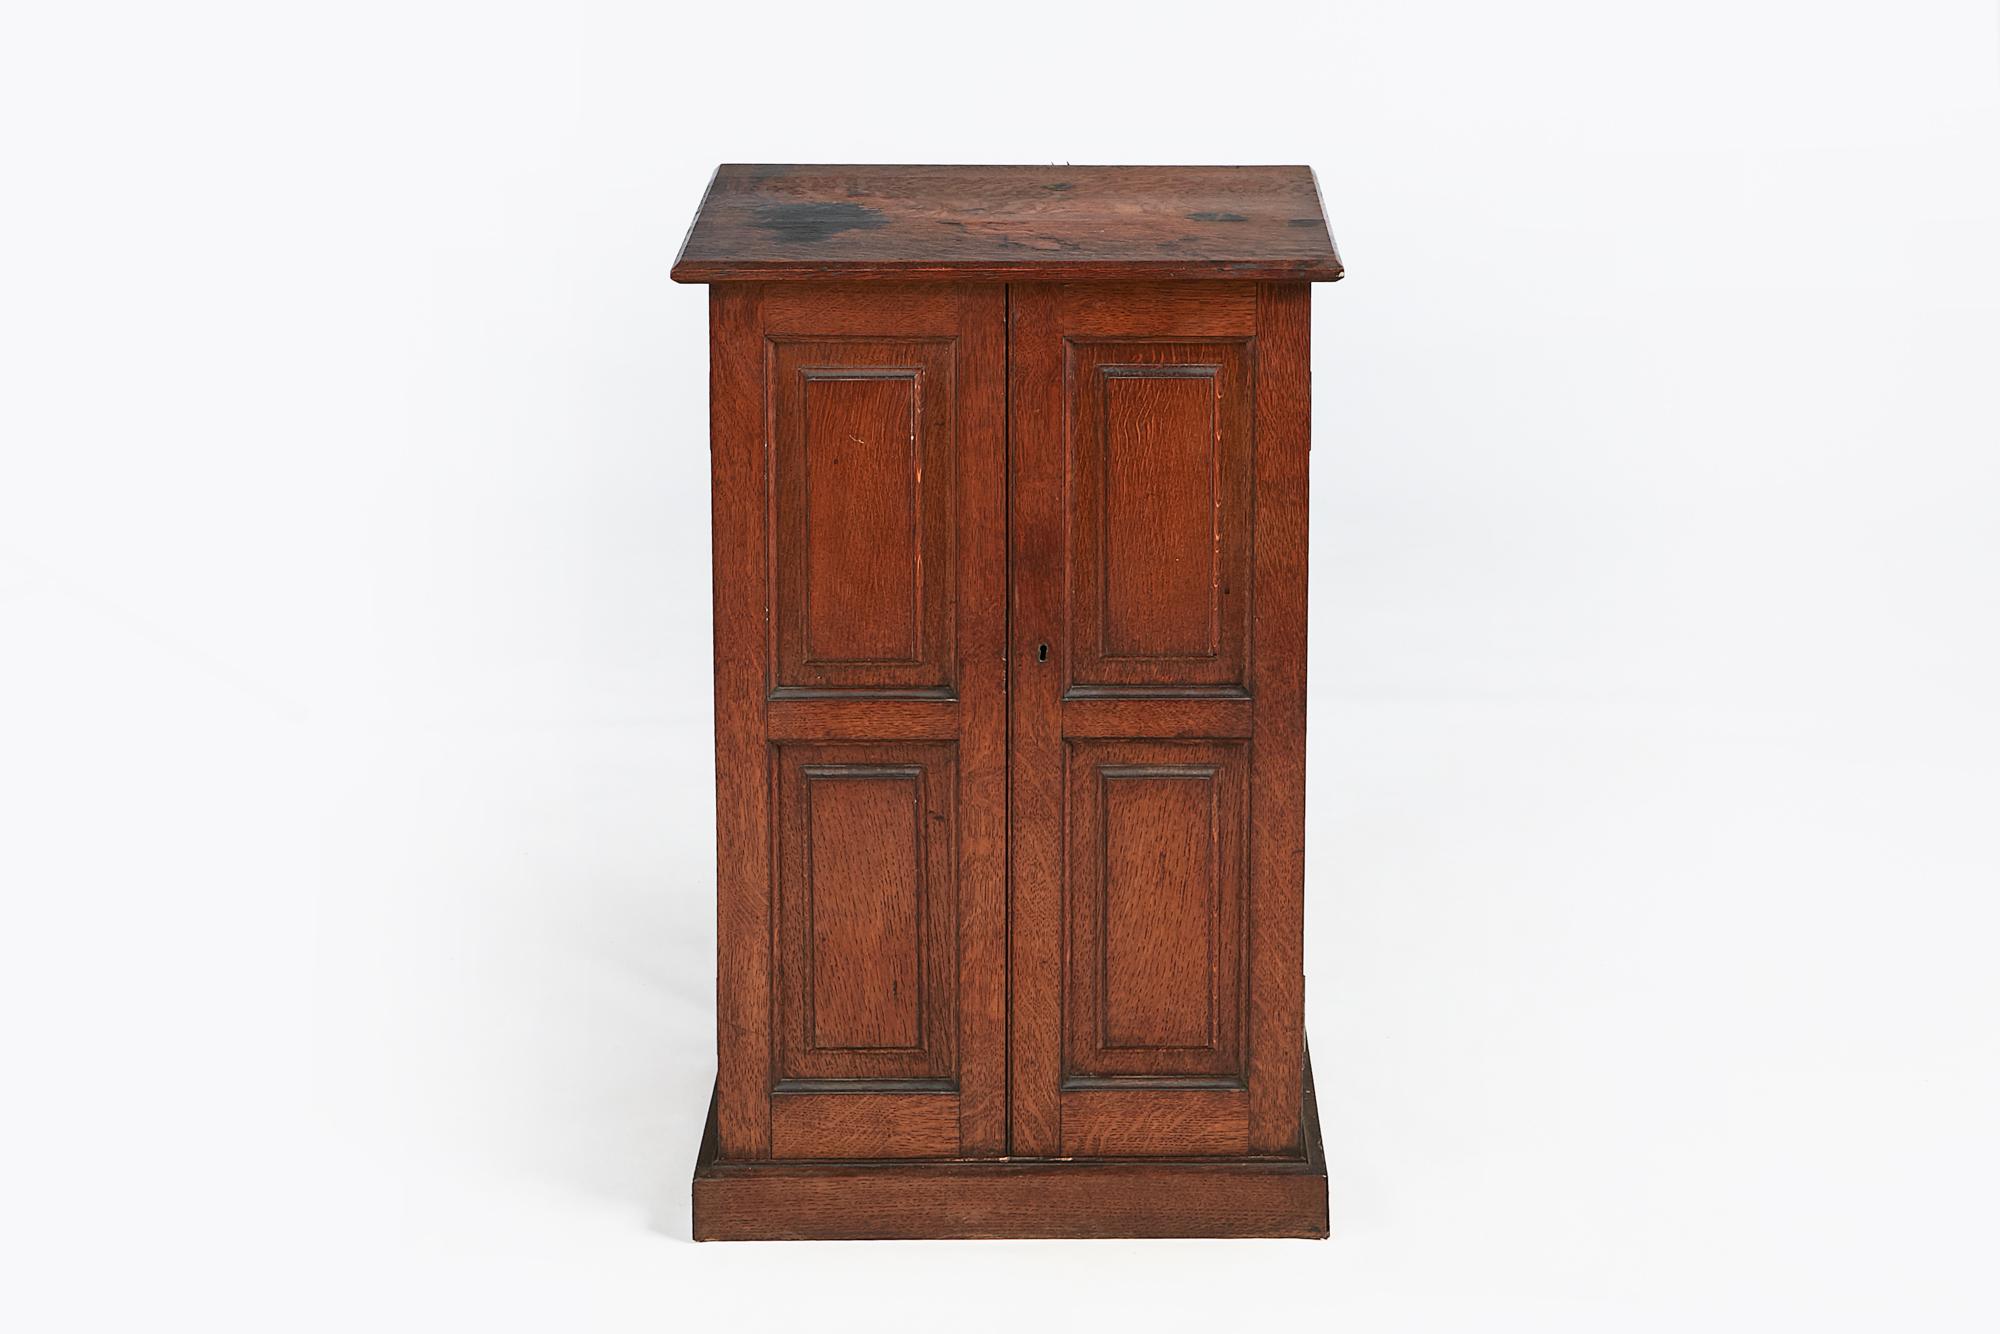 19th century oak coin cabinet, the moulded top above panelled body, the two front doors opening to reveal fitted interior of twenty two lined drawers terminating on platform base.